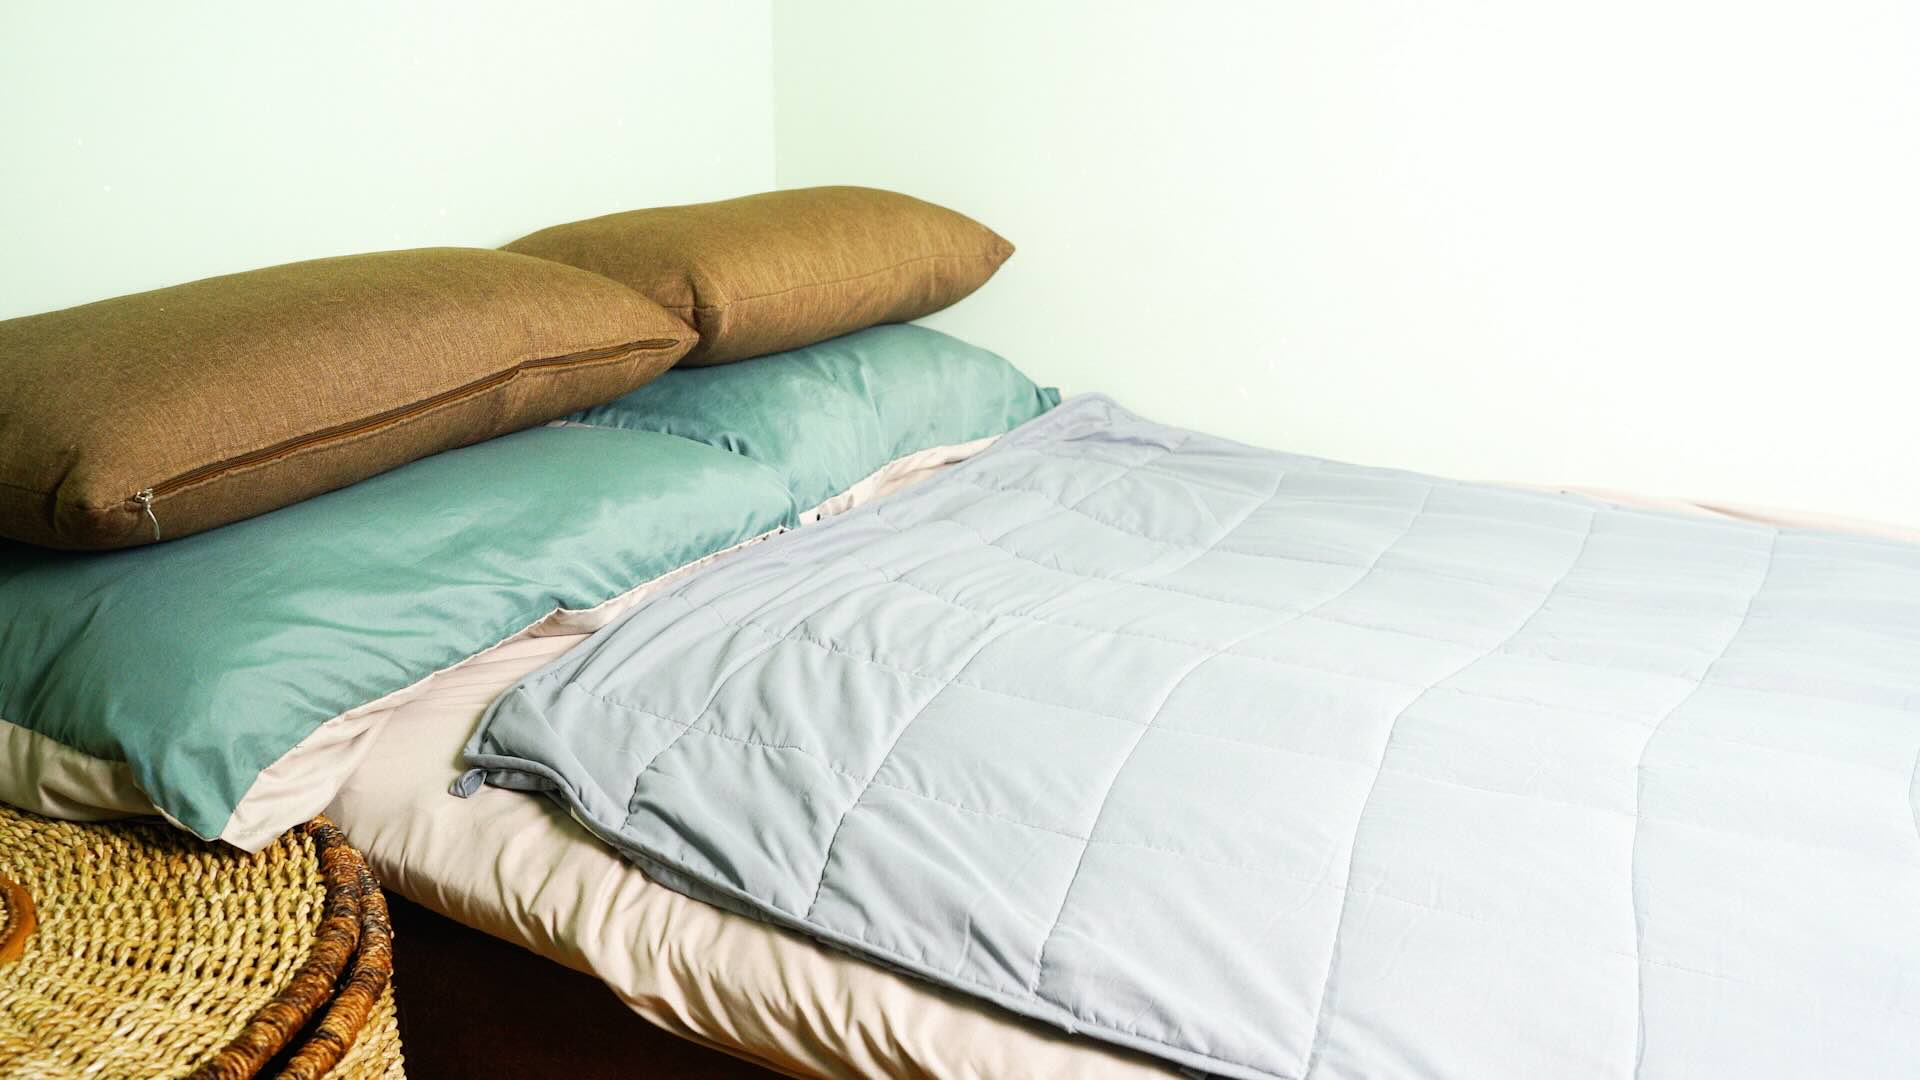 How To Put A Duvet Cover On A Weighted Blanket